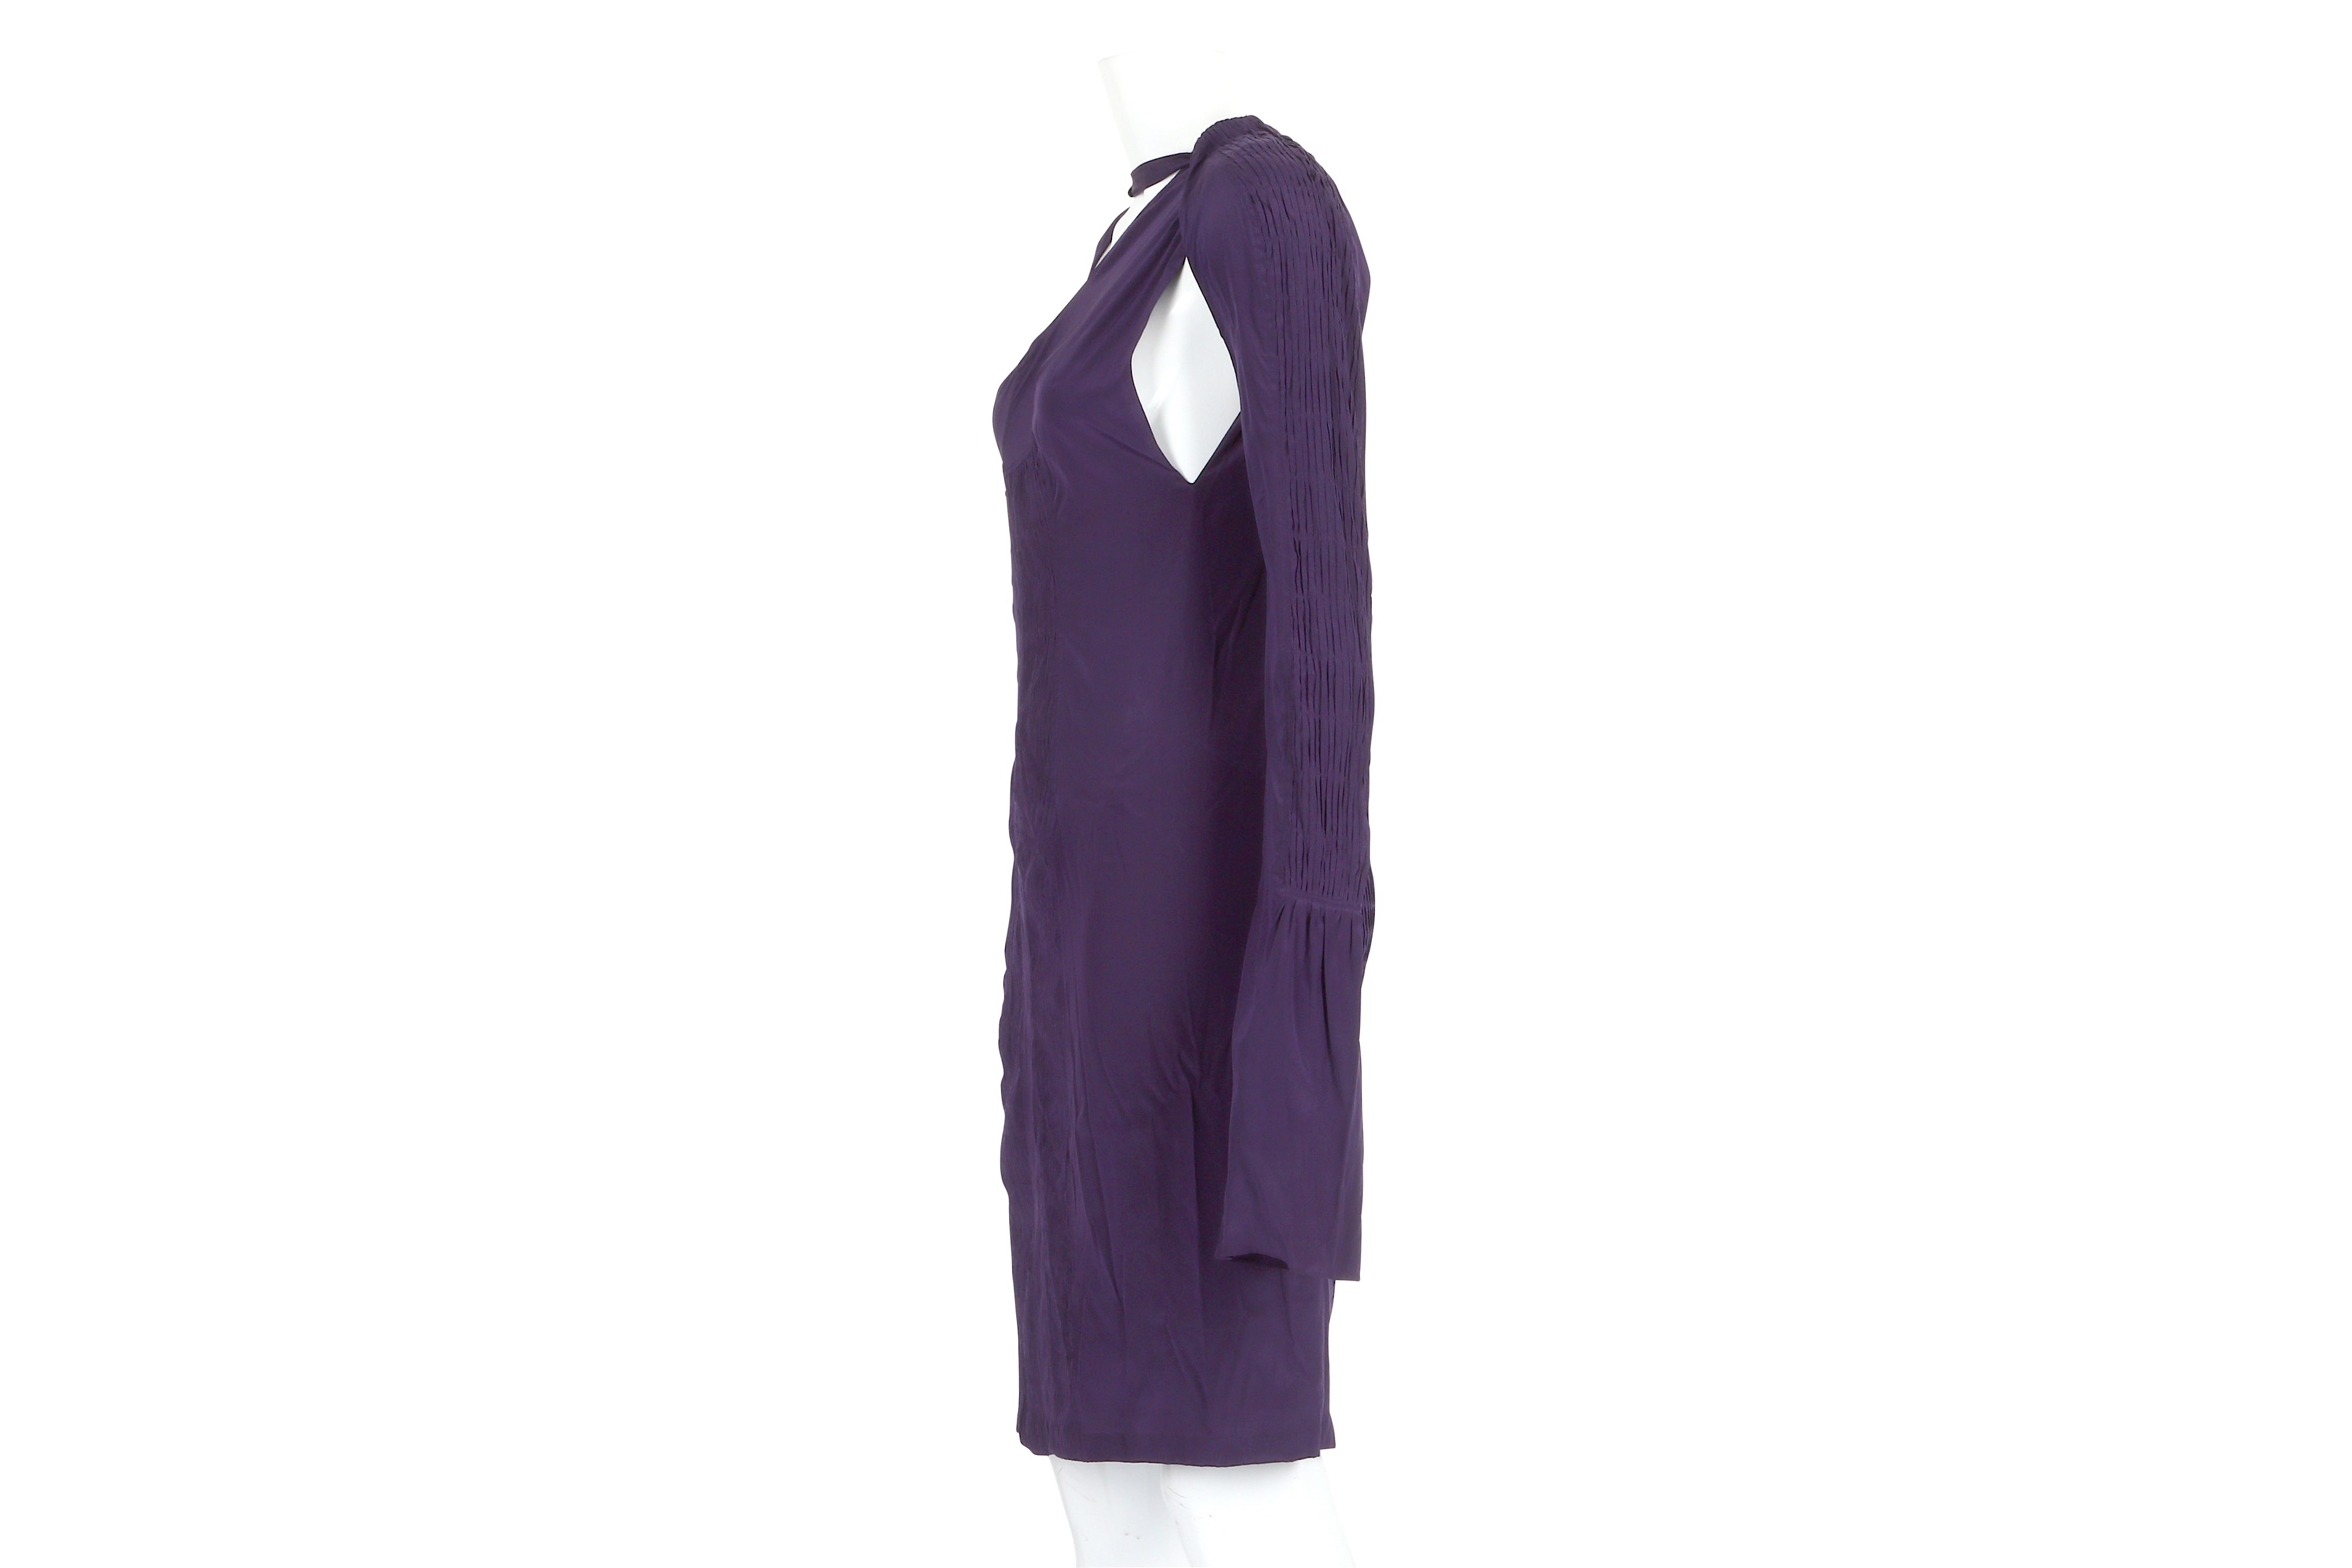 Tom Ford for Gucci Purple Silk Dress - size 40 - Image 4 of 7